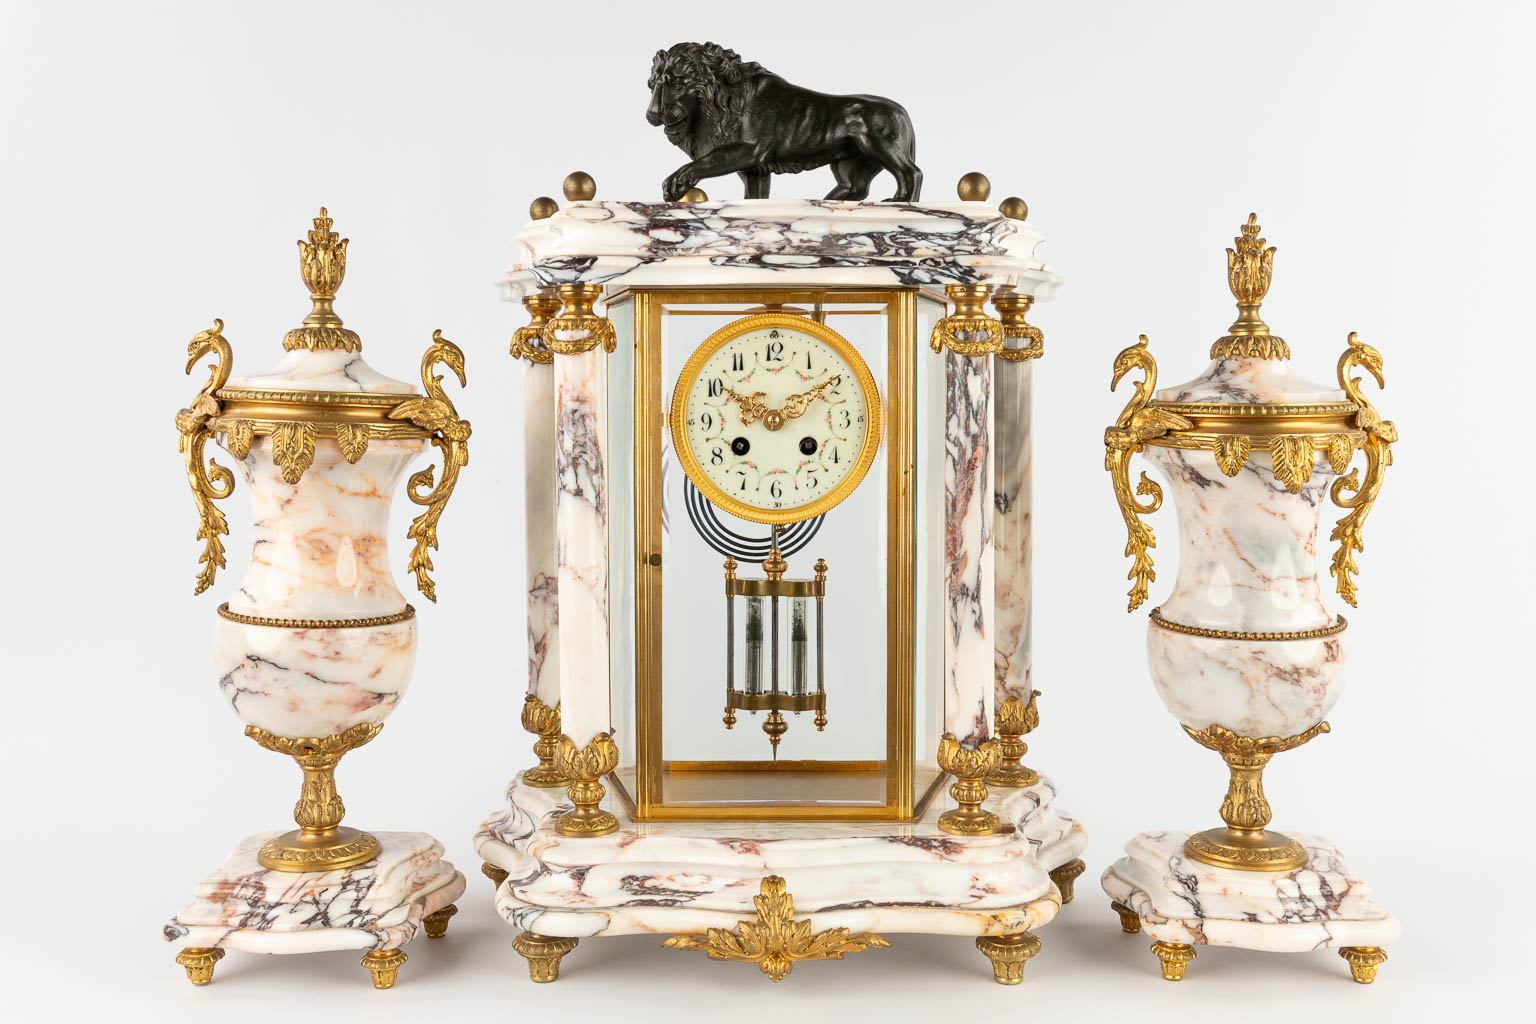 A three-piece mantle garniture portico clock and cassolettes, bronze mounted marble. 19th C. (D:19 x W:38 x H:51 cm)